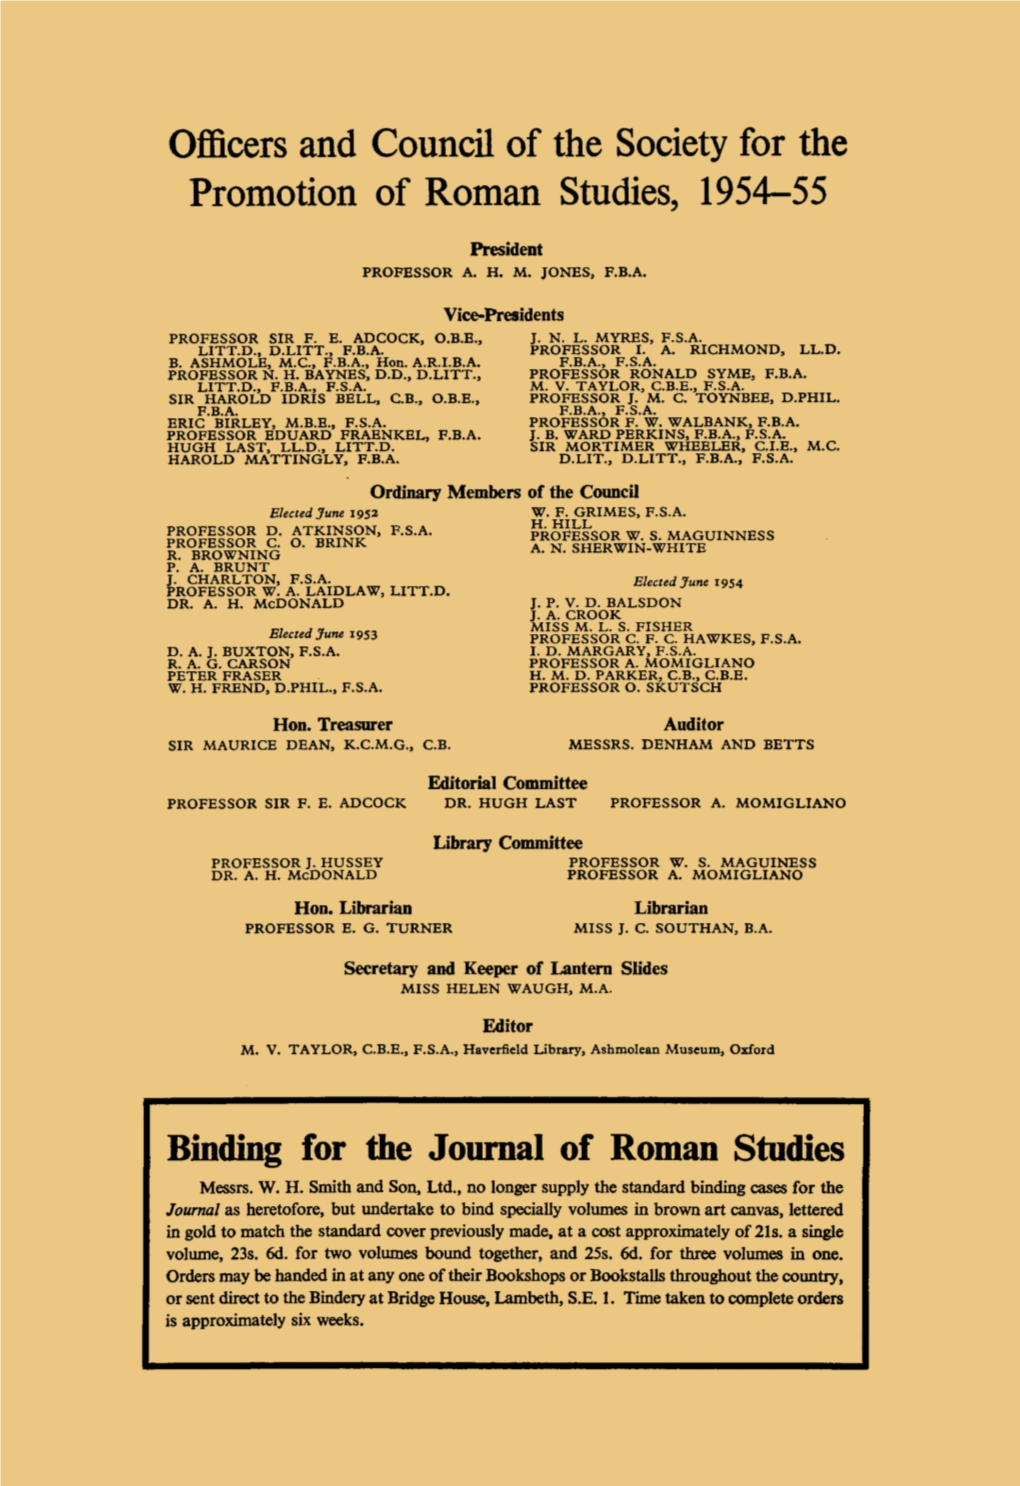 Officers and Council of the Society for the Promotion of Roman Studies, 1954-55